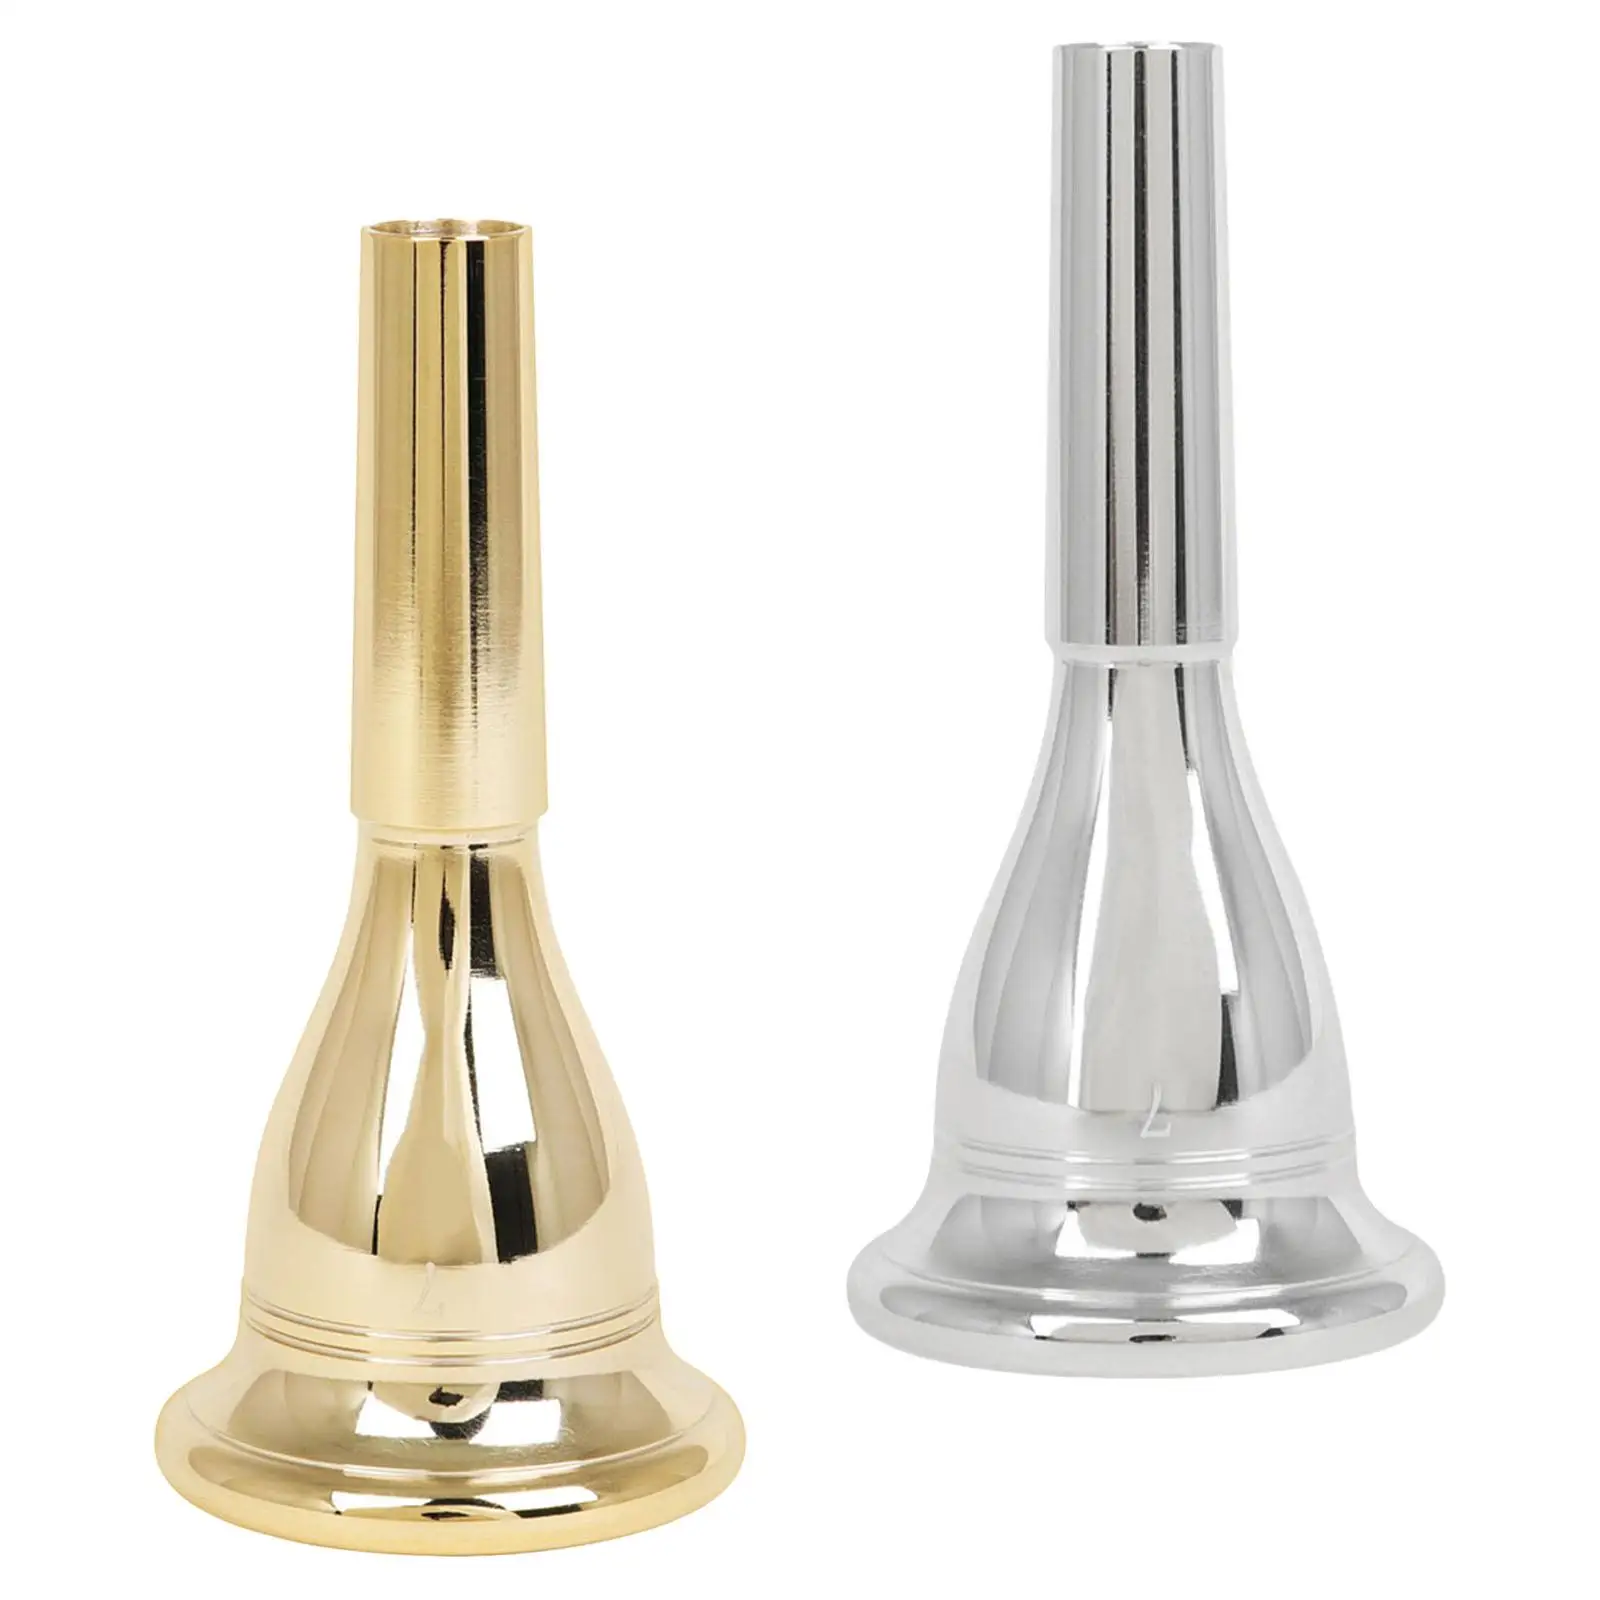 Brass Tuba Mouthpiece, Replacement Good Air Tightness Instrument Accessories Precise sound Number 7 for Professional